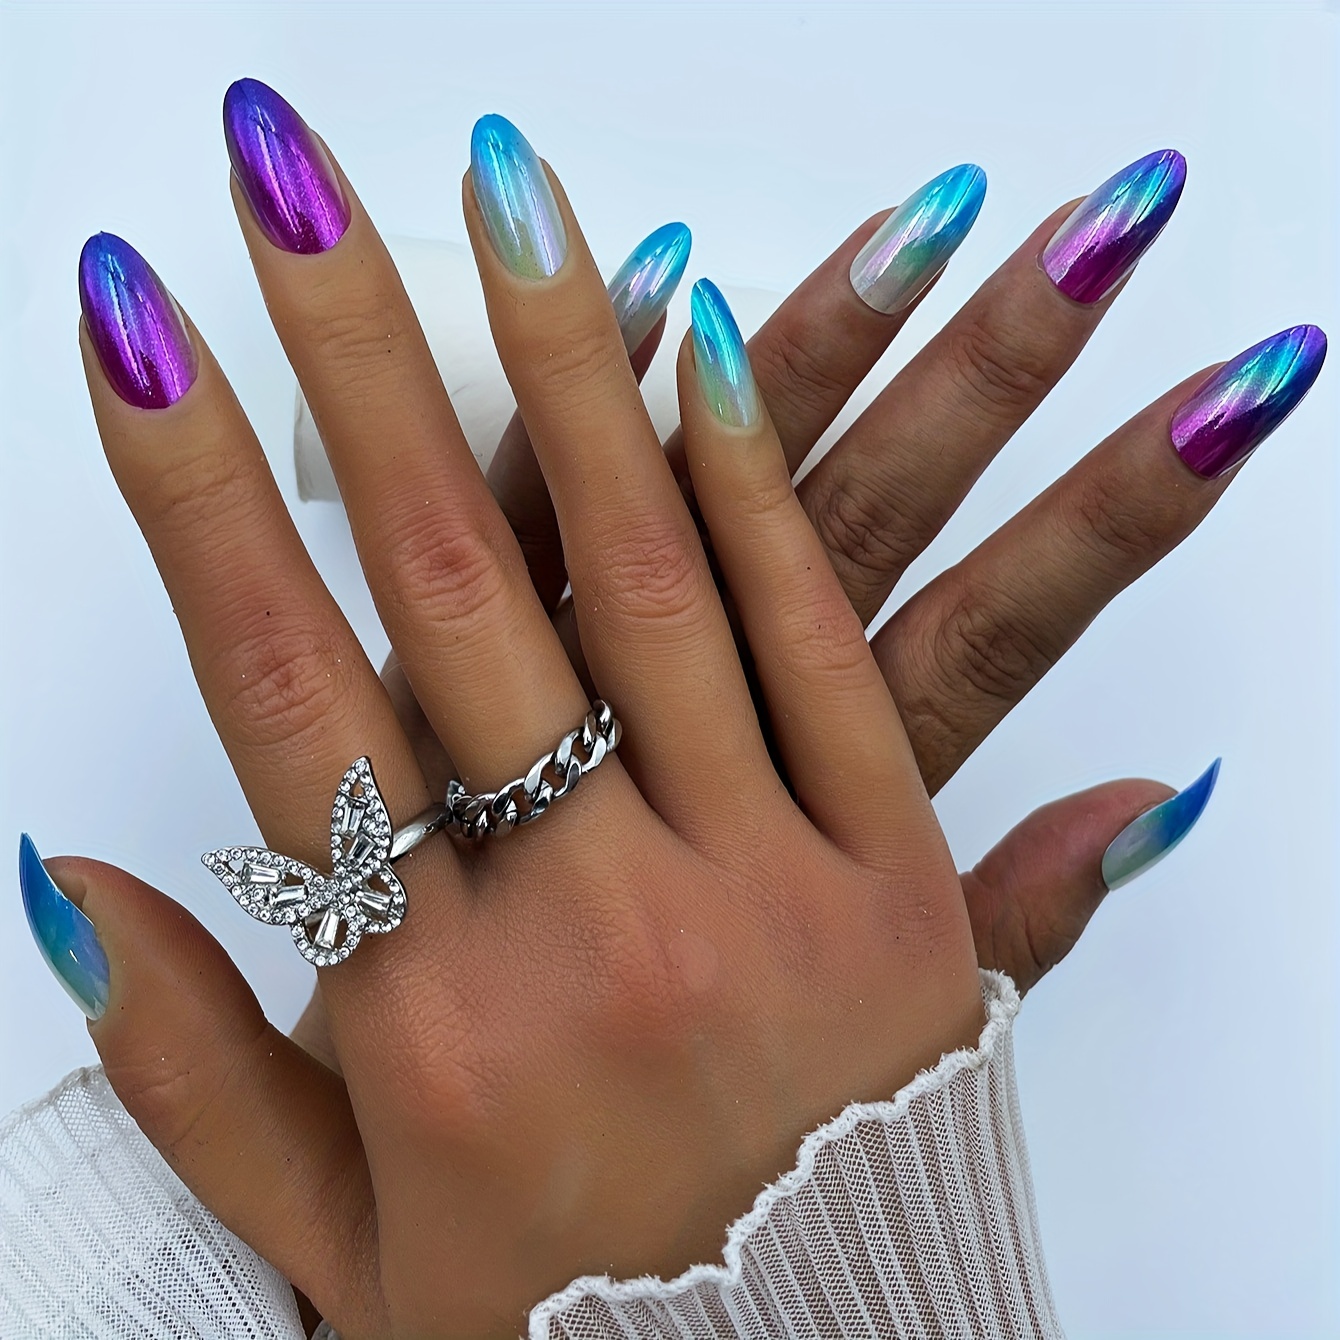 

24pcs Glossy Medium Almond Fake Nails, Aurora Blue And Purple Gradient Press On Nails, Sweet Cool Full Cover False Nails For Women Girls